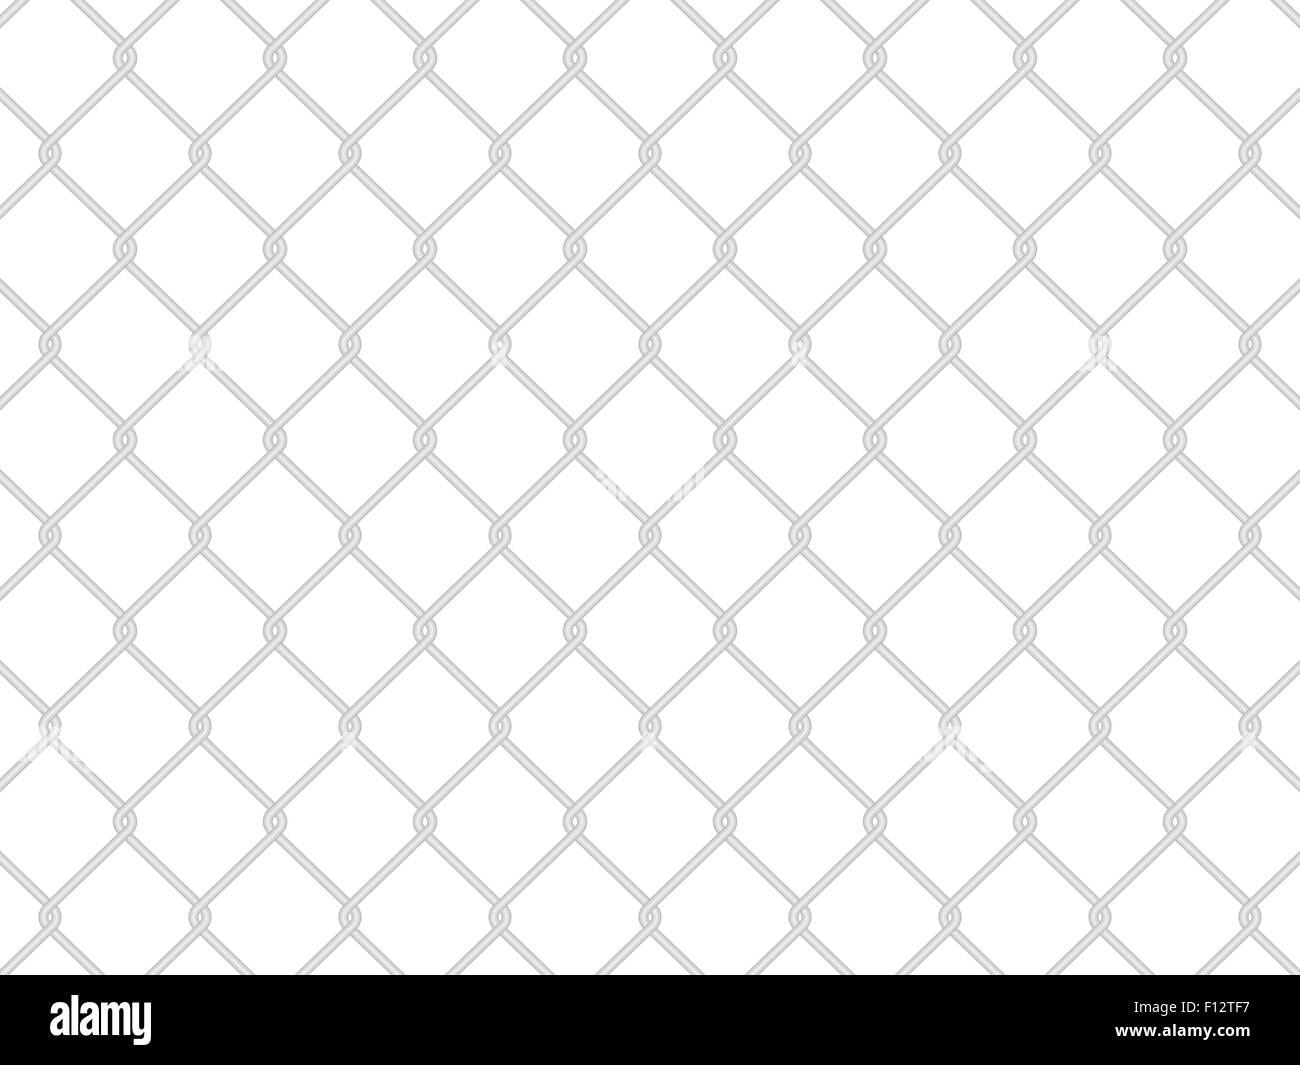 Metallic wire fence background. Vector illustration. Stock Vector